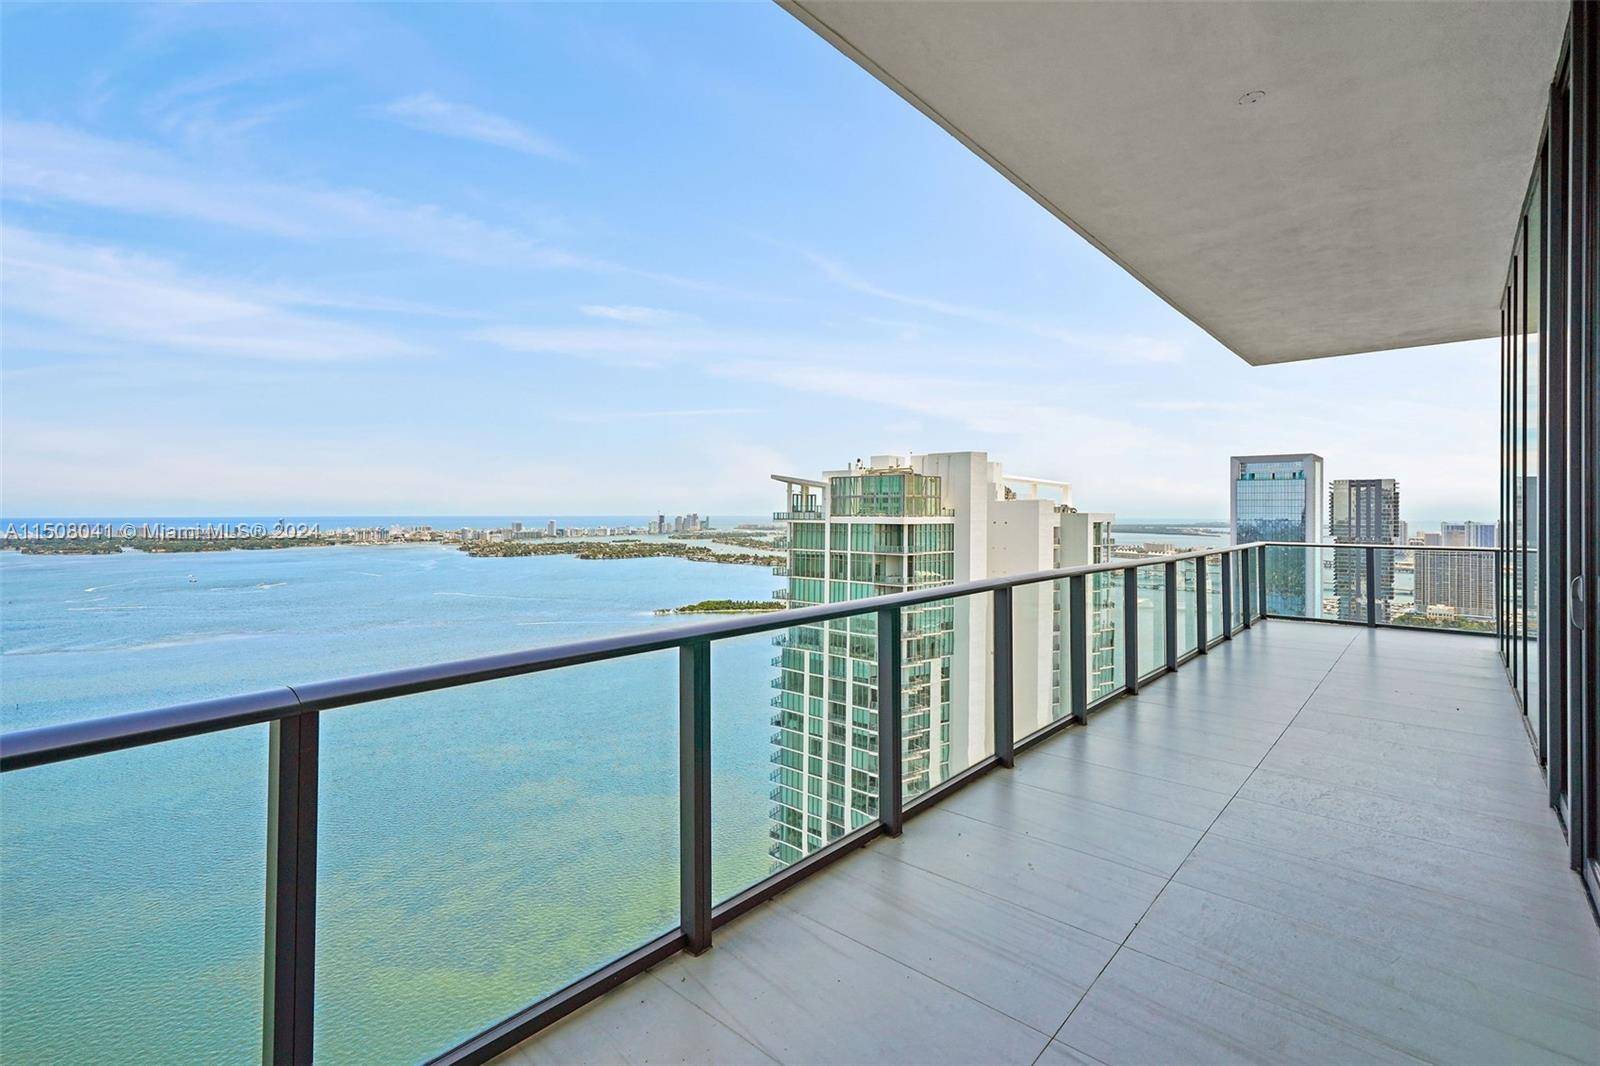 Turnkey fully furnished professionally remodeled penthouse at Gran Paraiso.